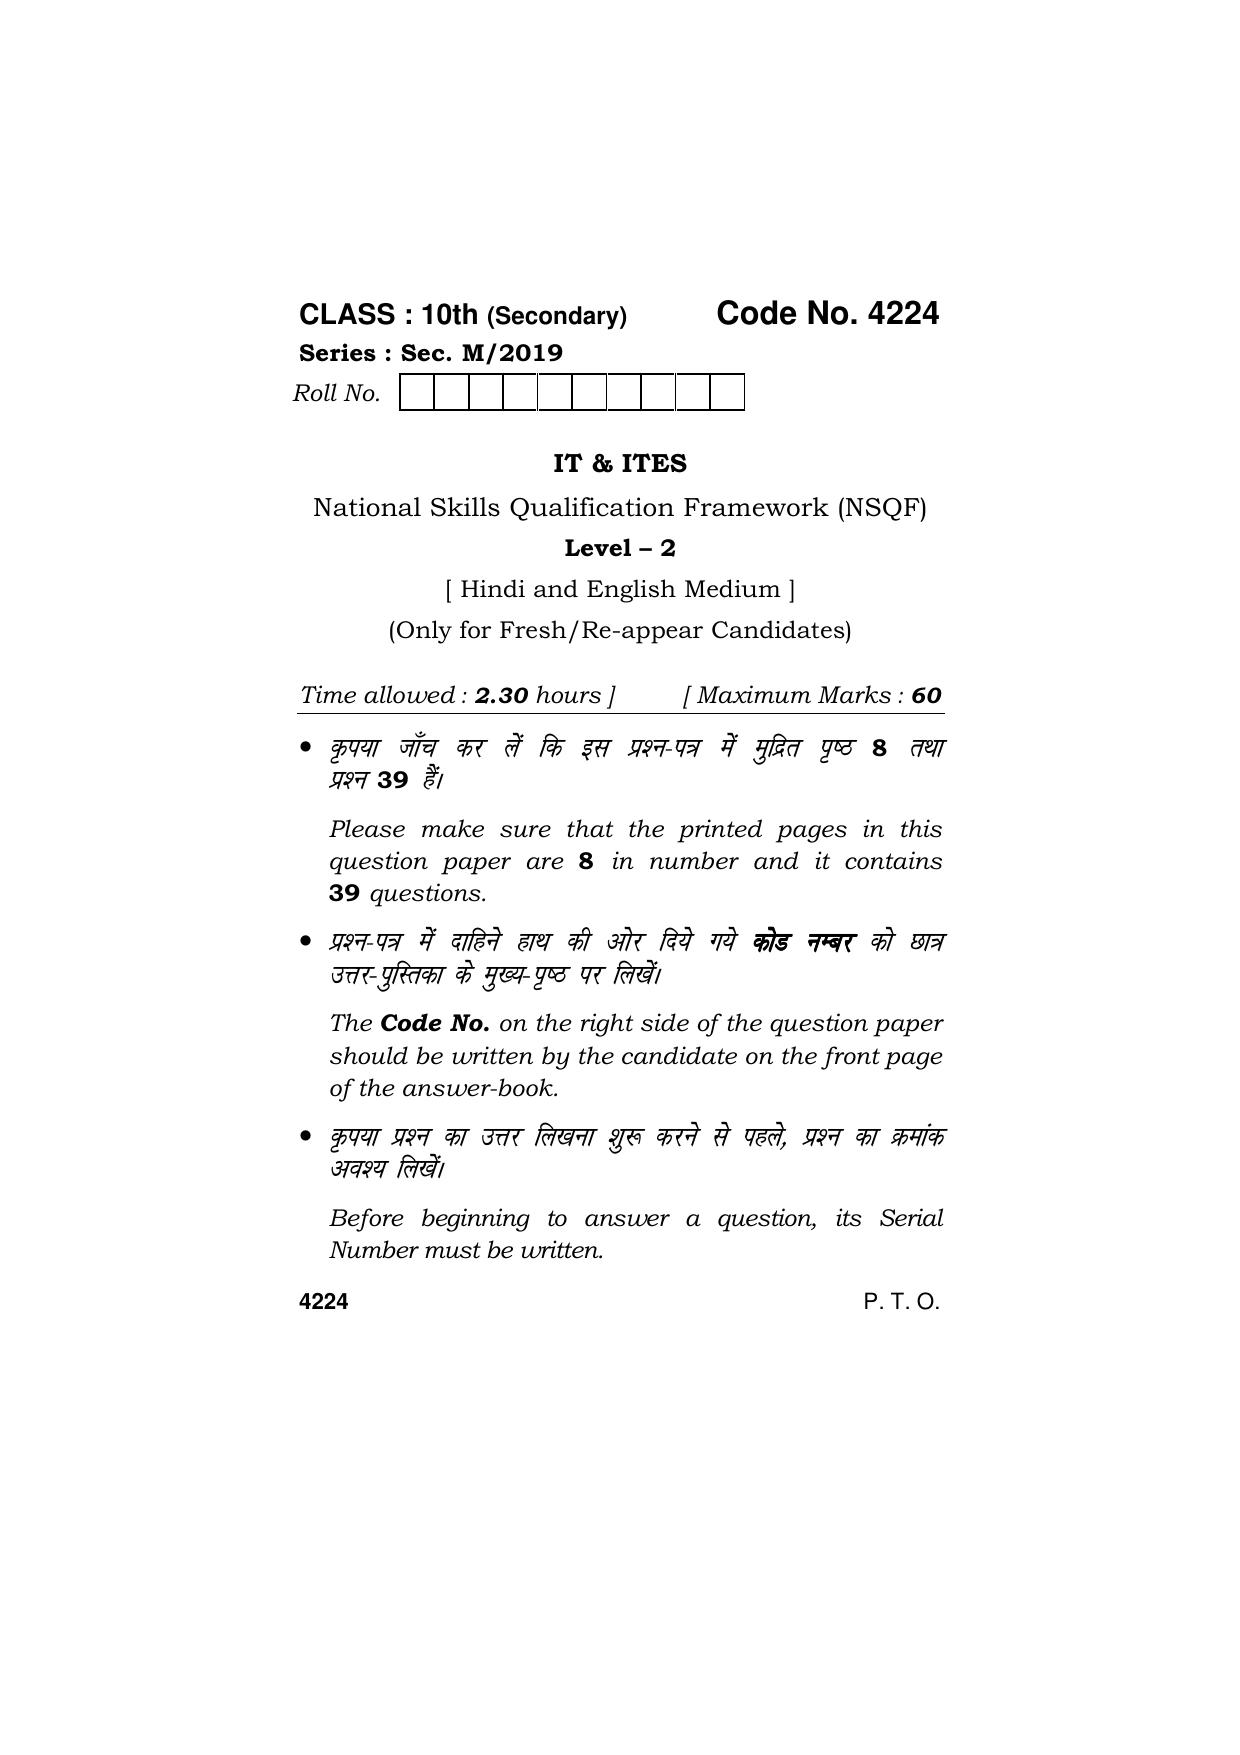 Haryana Board HBSE Class 10 IT & ITES 2019 Question Paper - Page 1